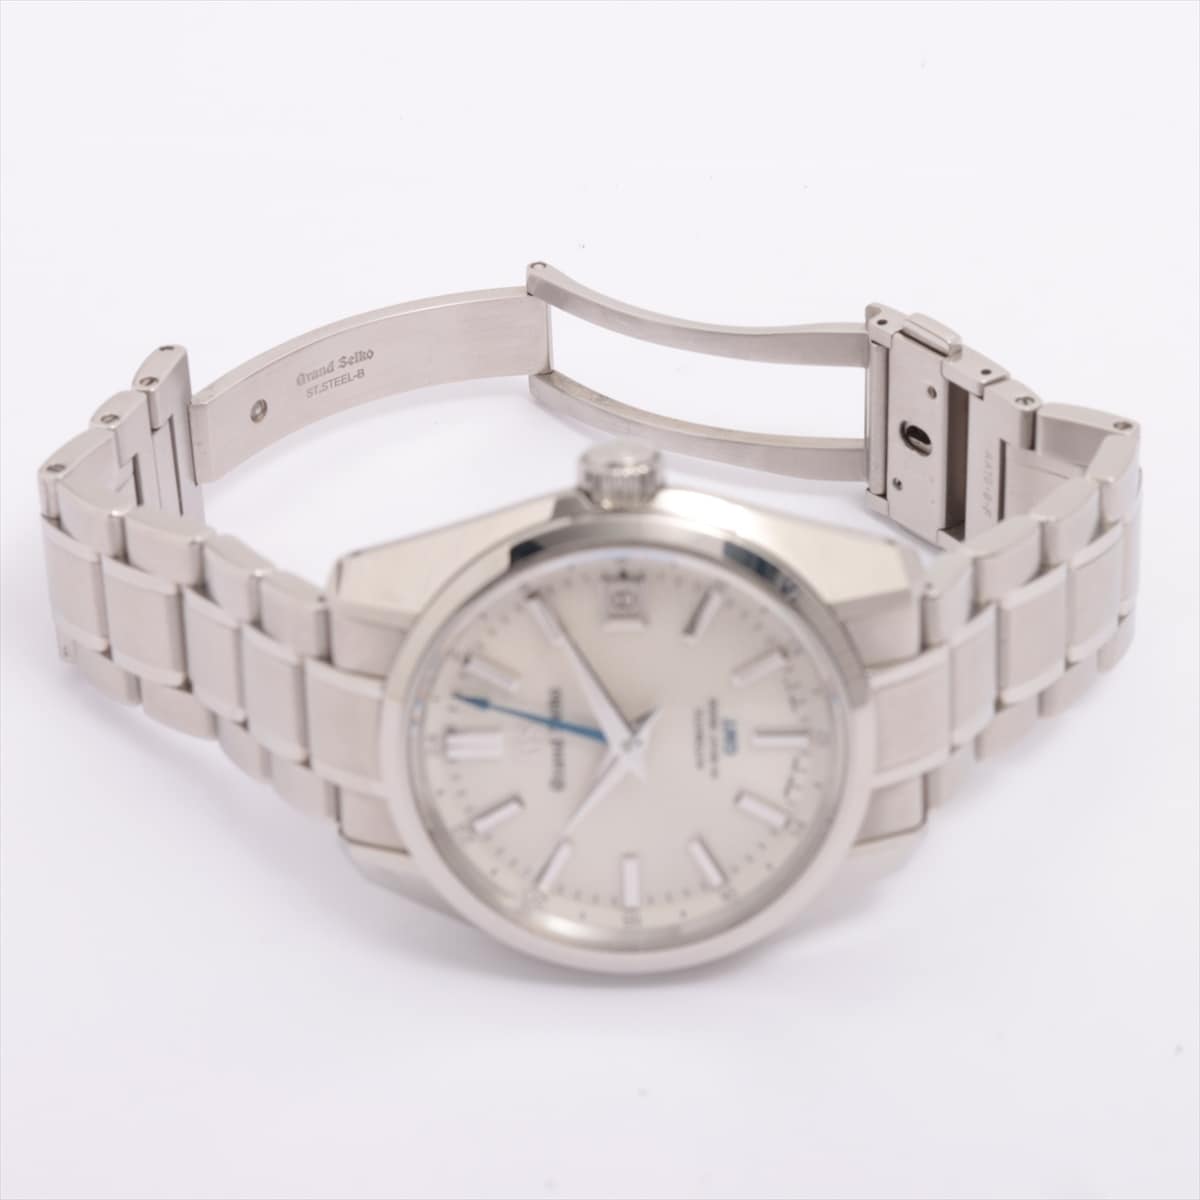 Grand Seiko SBGJ201 SS AT White-Face Extra-Link 5